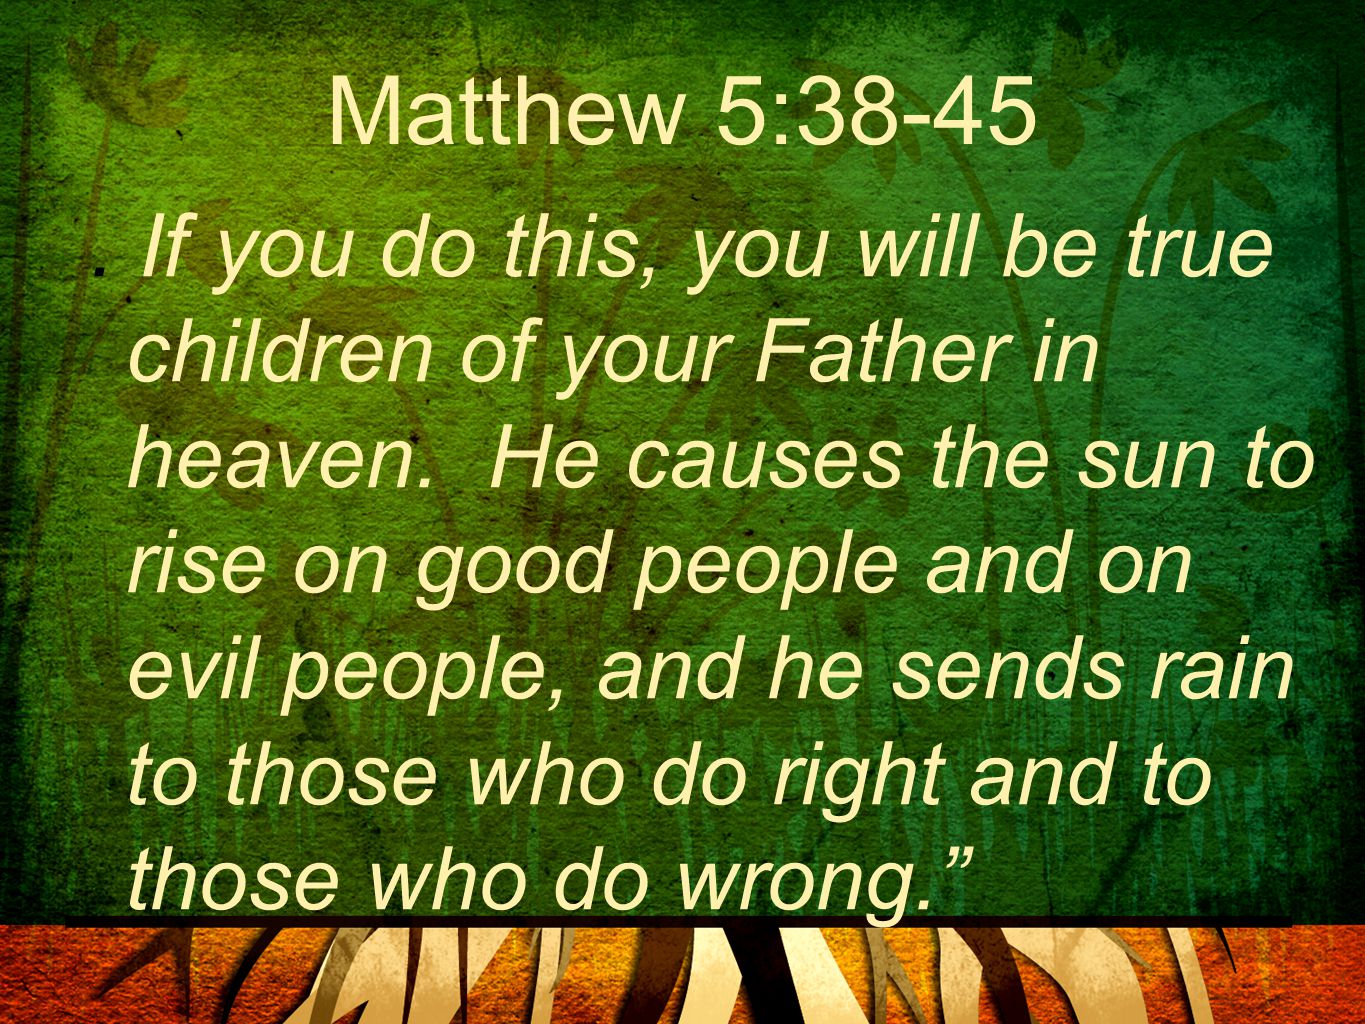 Matthew 5: If you do this, you will be true children of your Father in heaven.